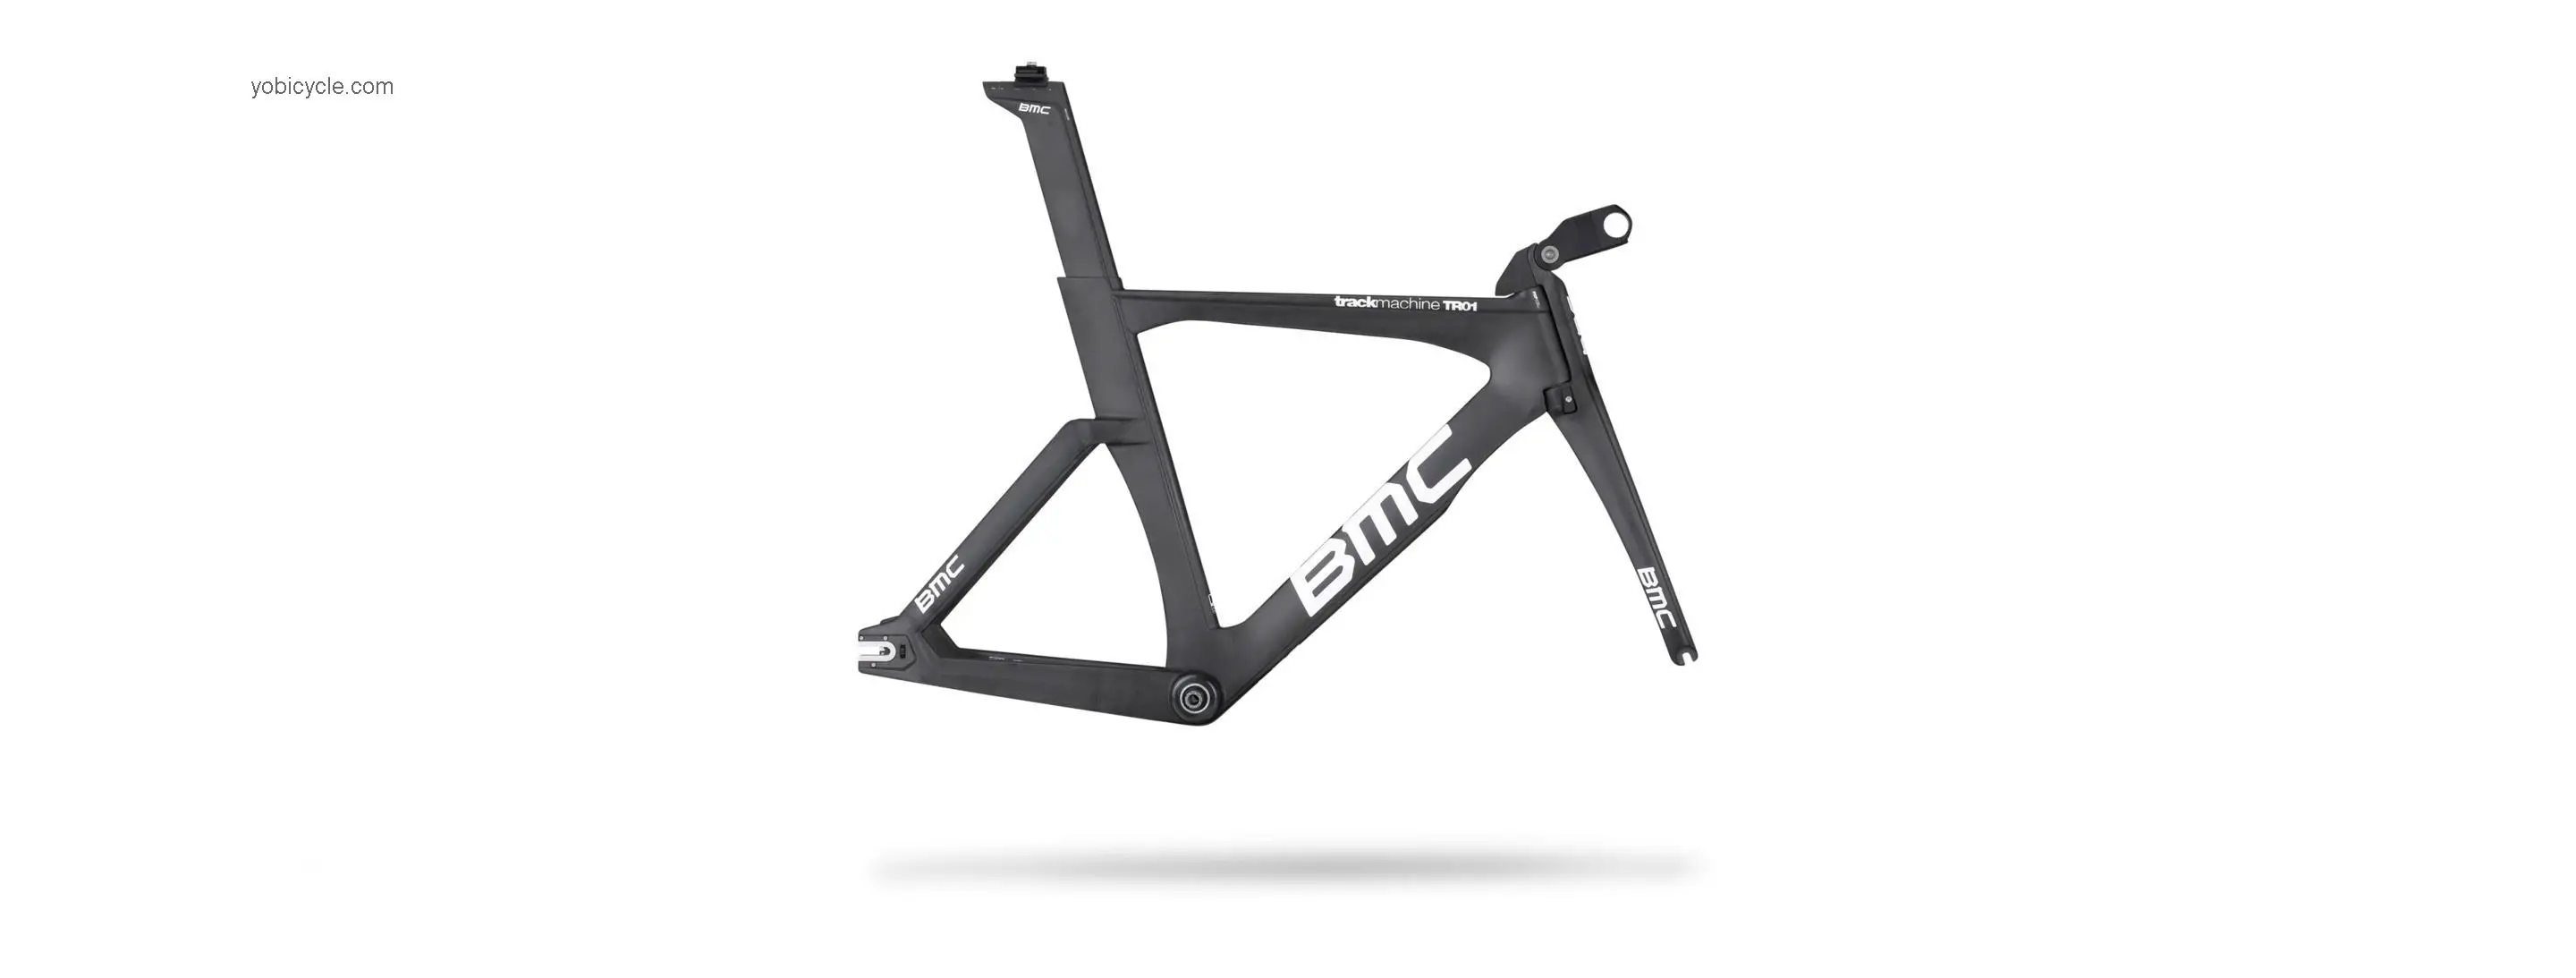 BMC Trackmachine TR01 Frameset competitors and comparison tool online specs and performance